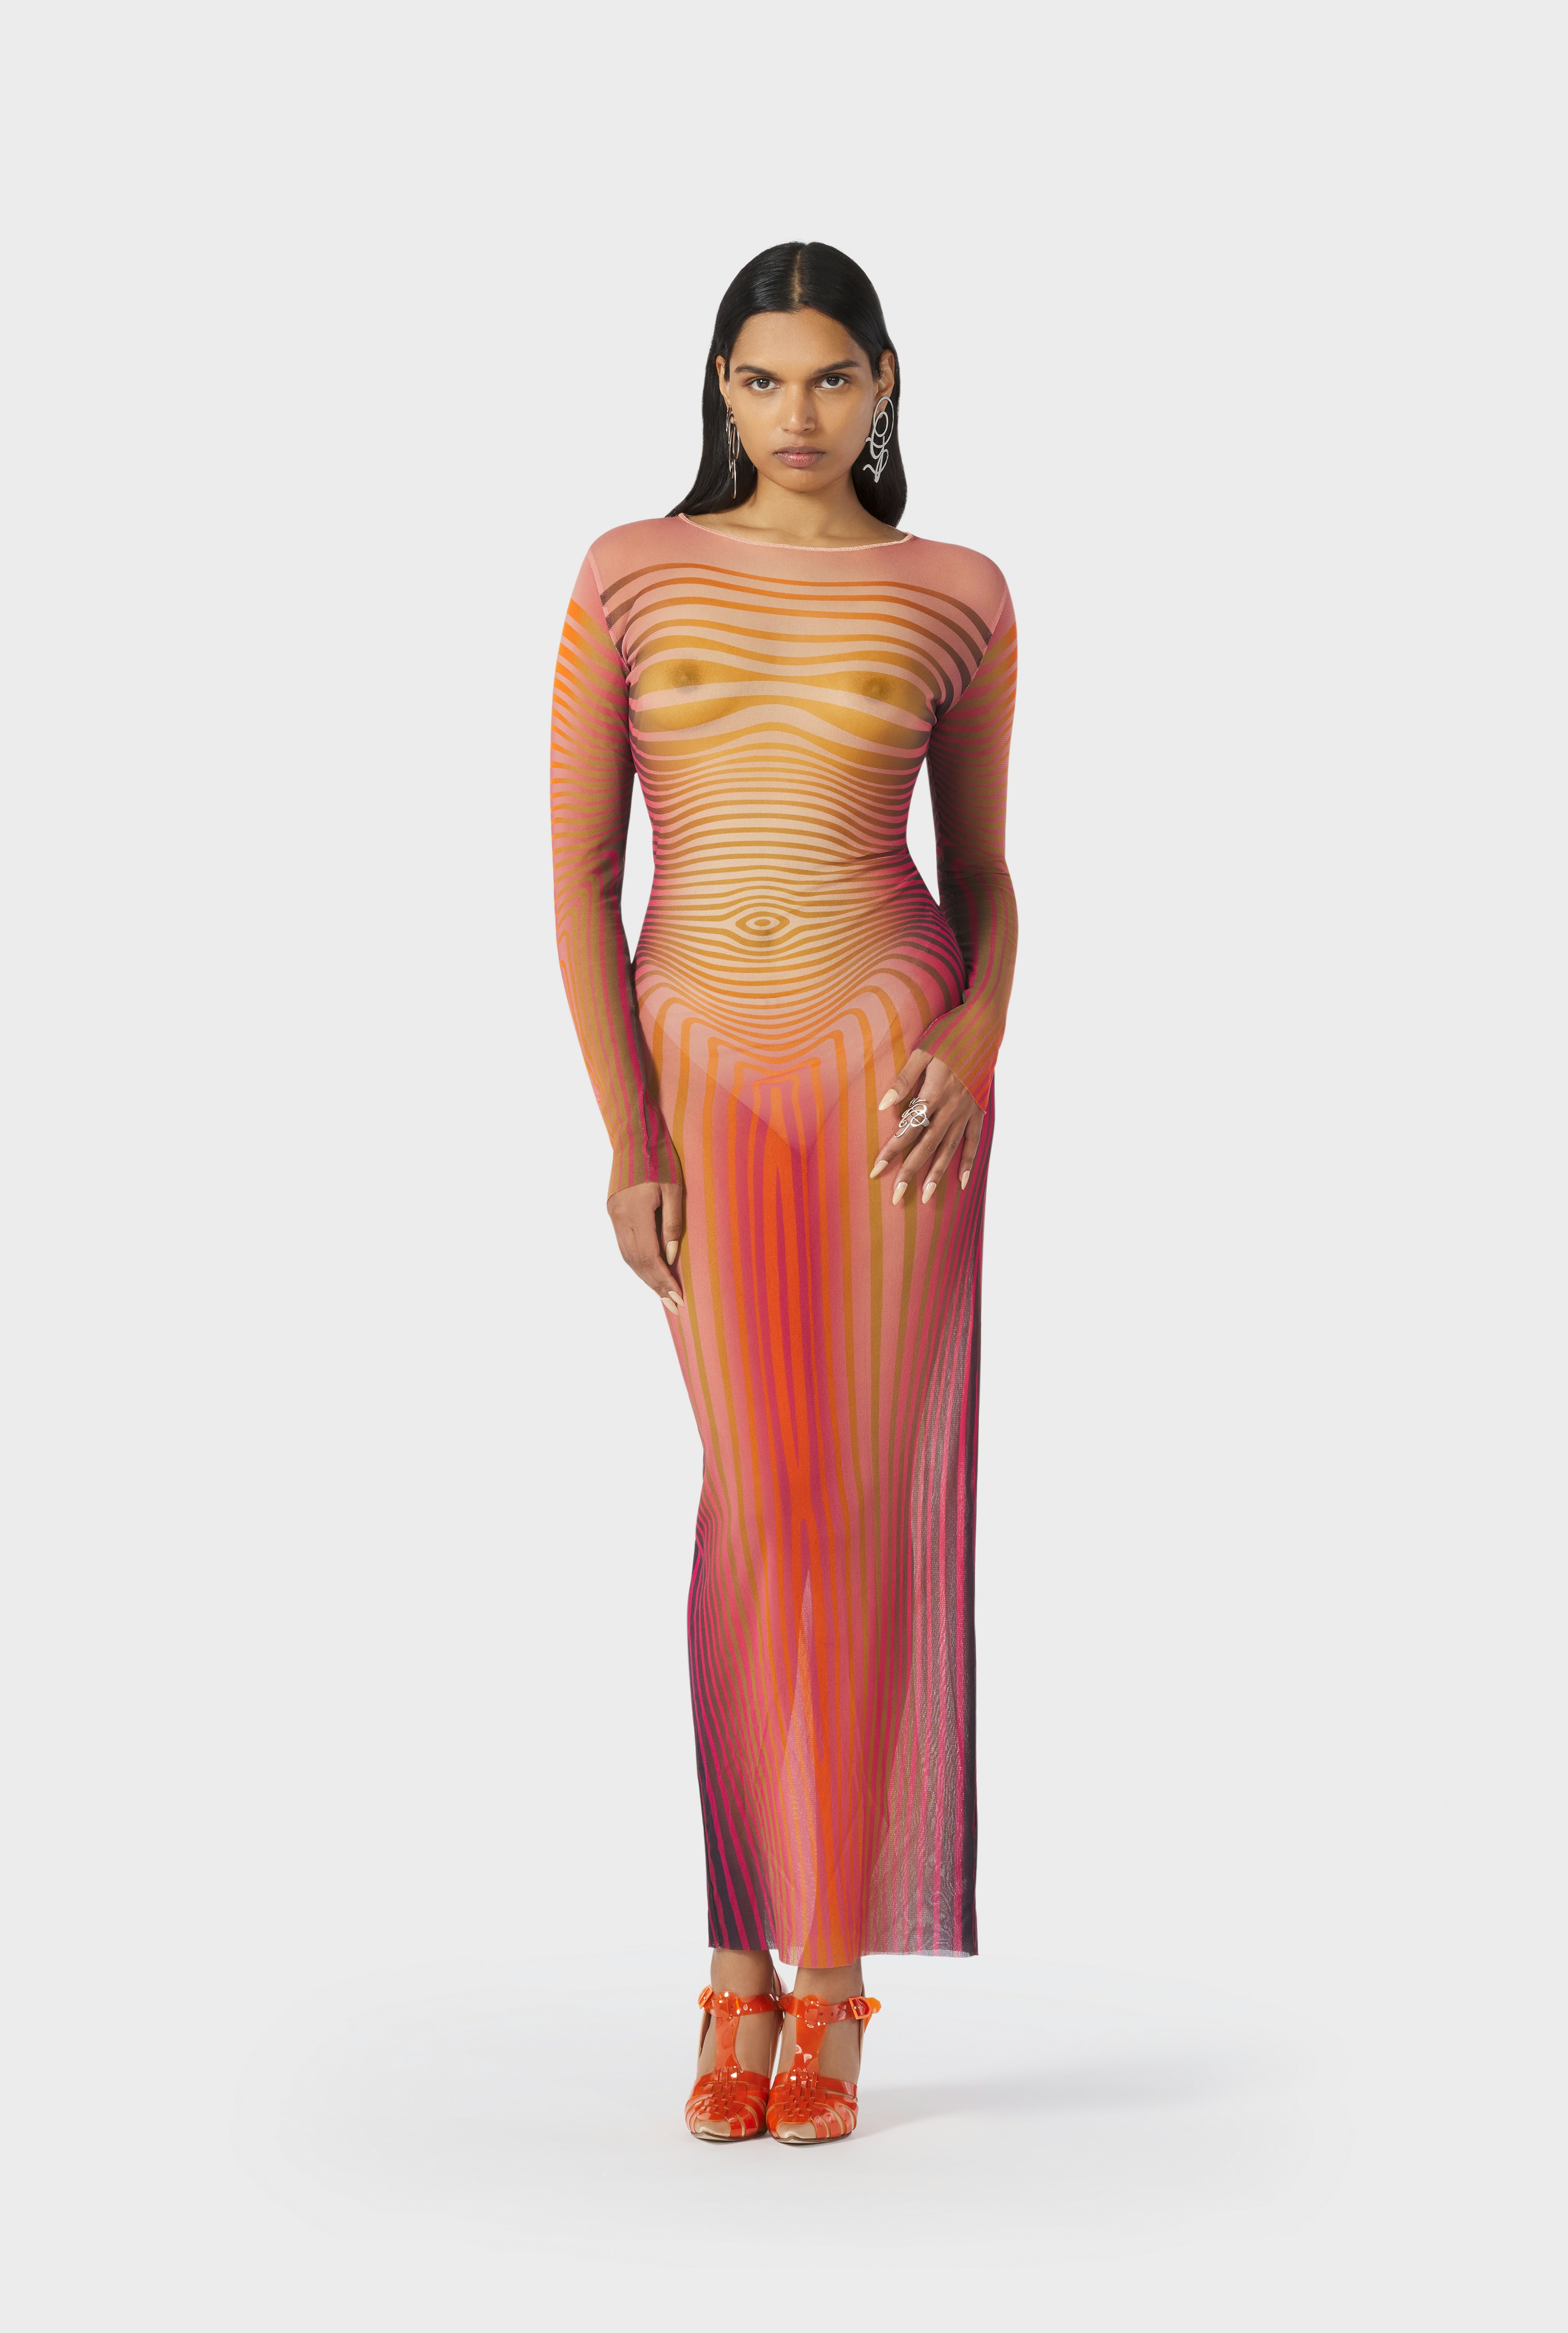 The Red Body Morphing Dress